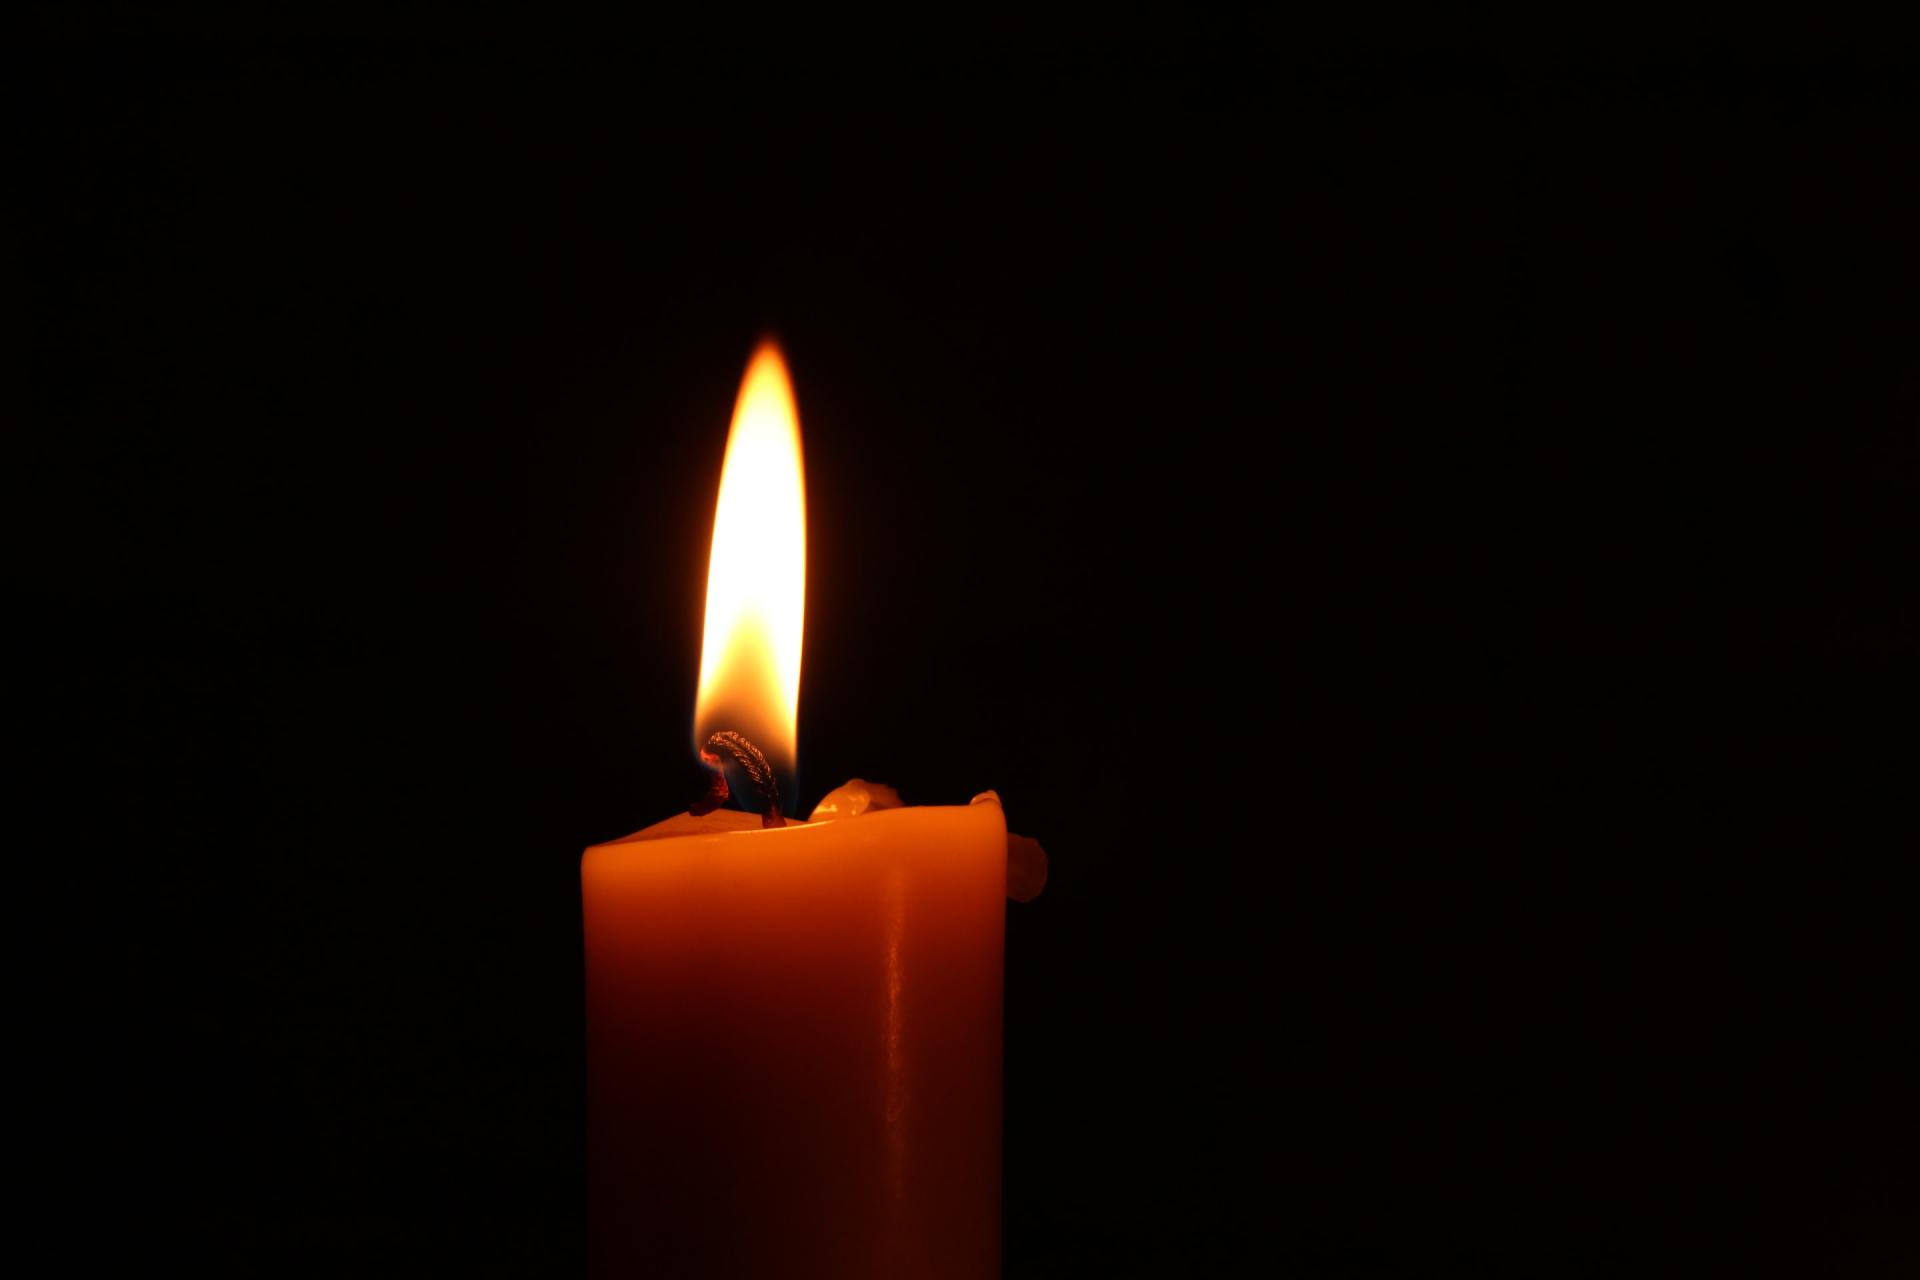 A close up of a lit candle in the dark.